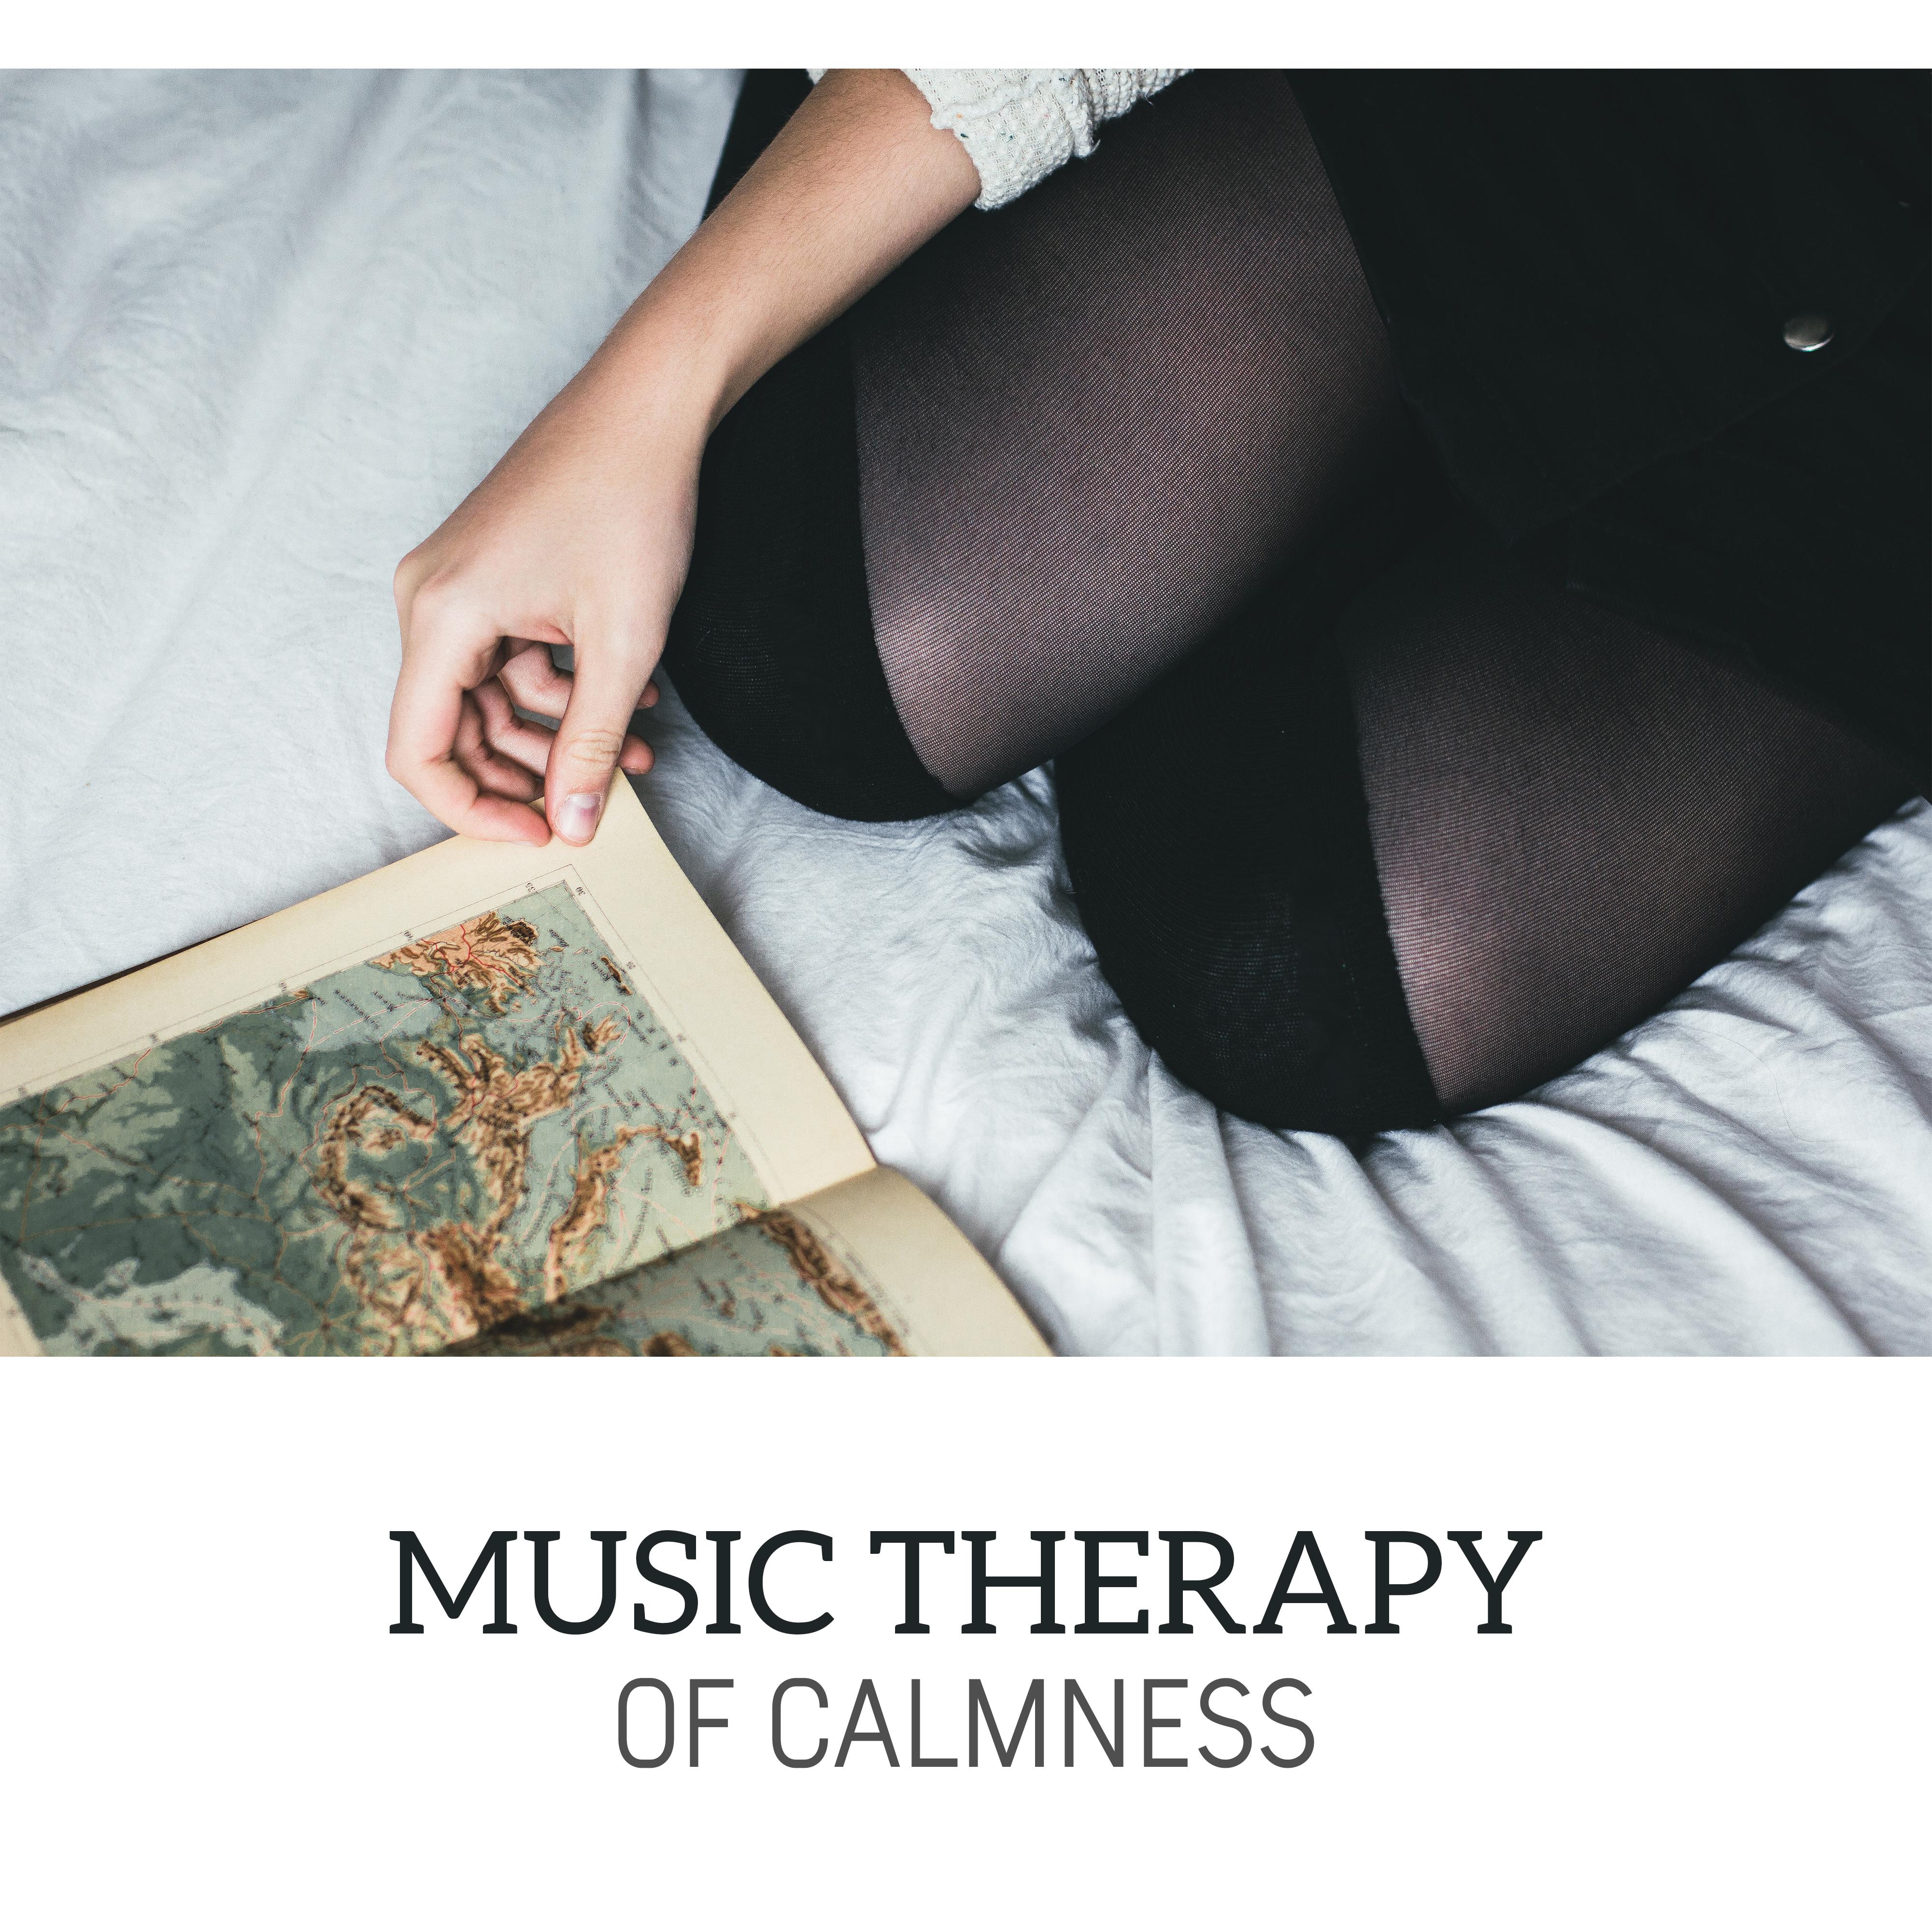 Music Therapy of Calmness